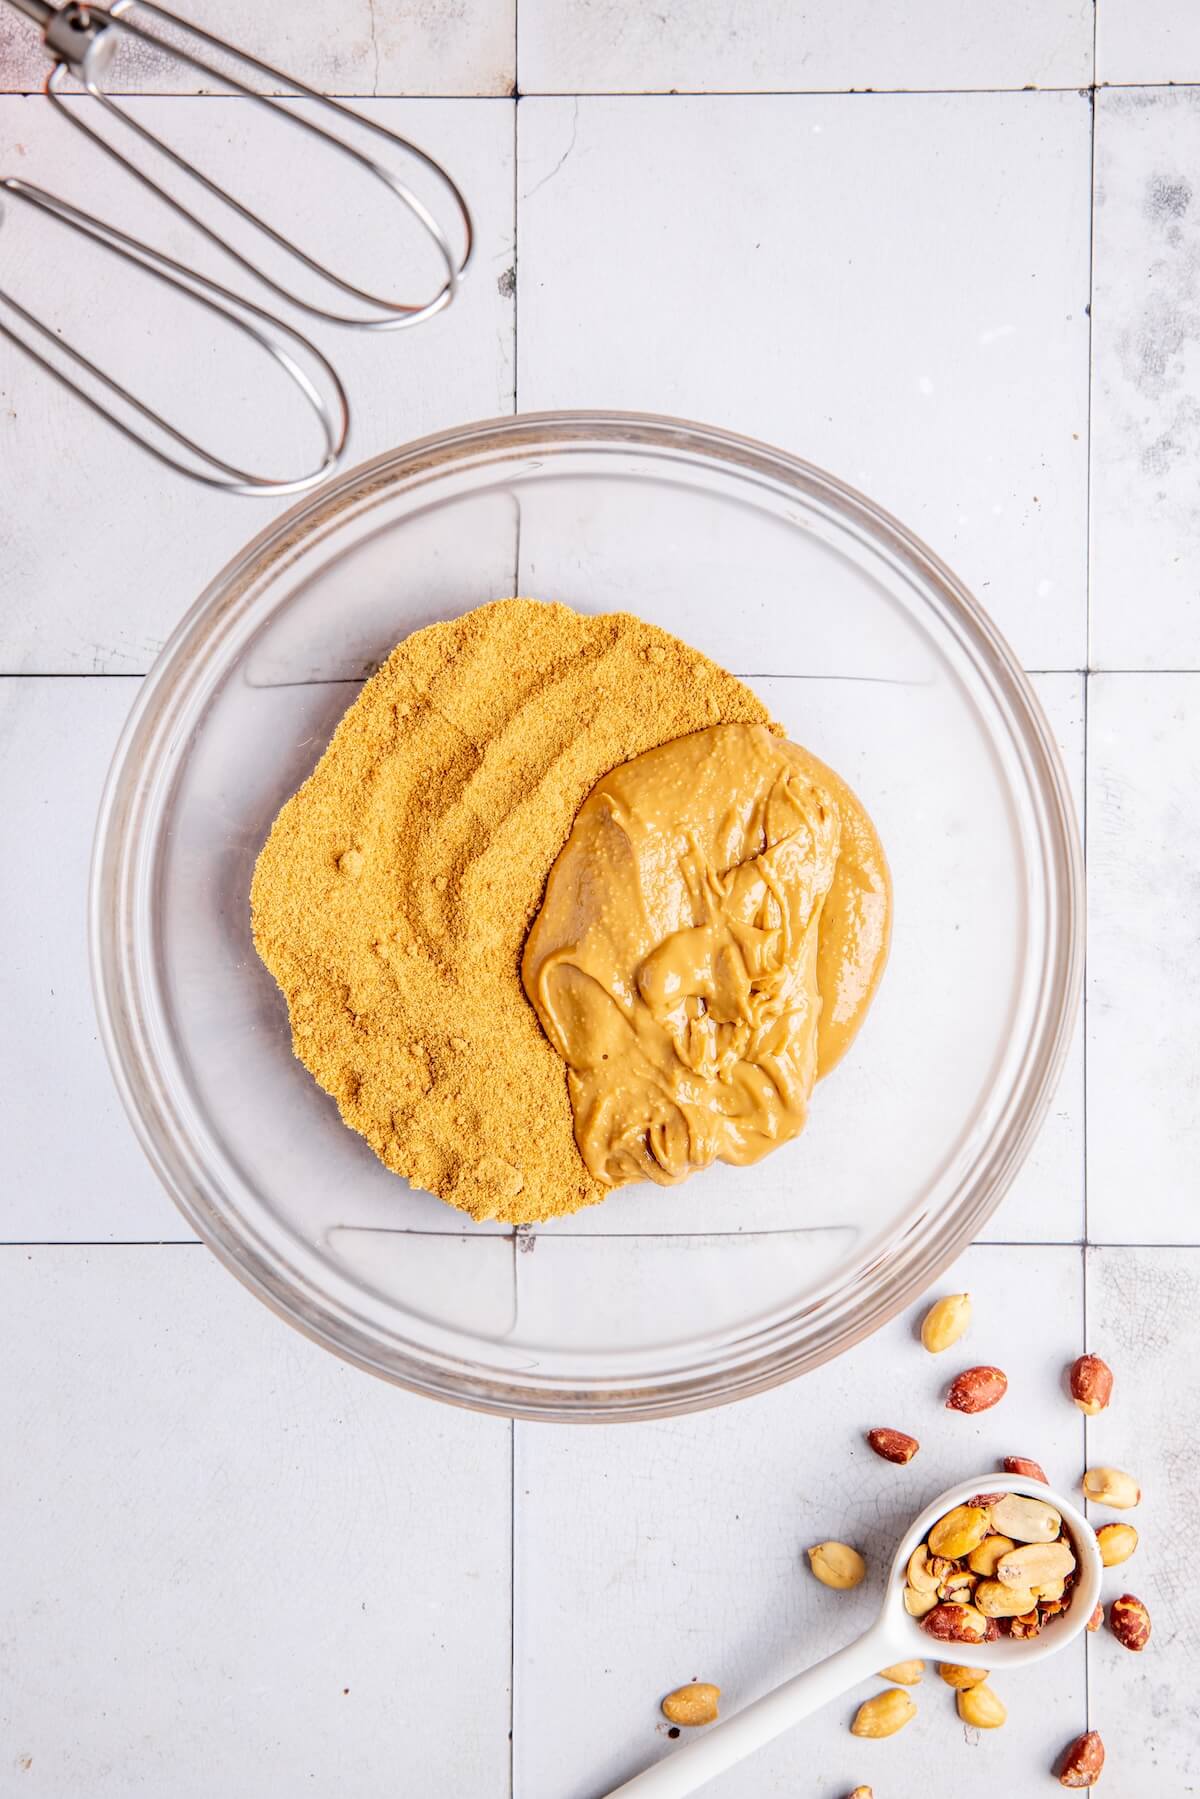 5-Ingredient Peanut Butter Mousse Step 1 - Olivia Adriance